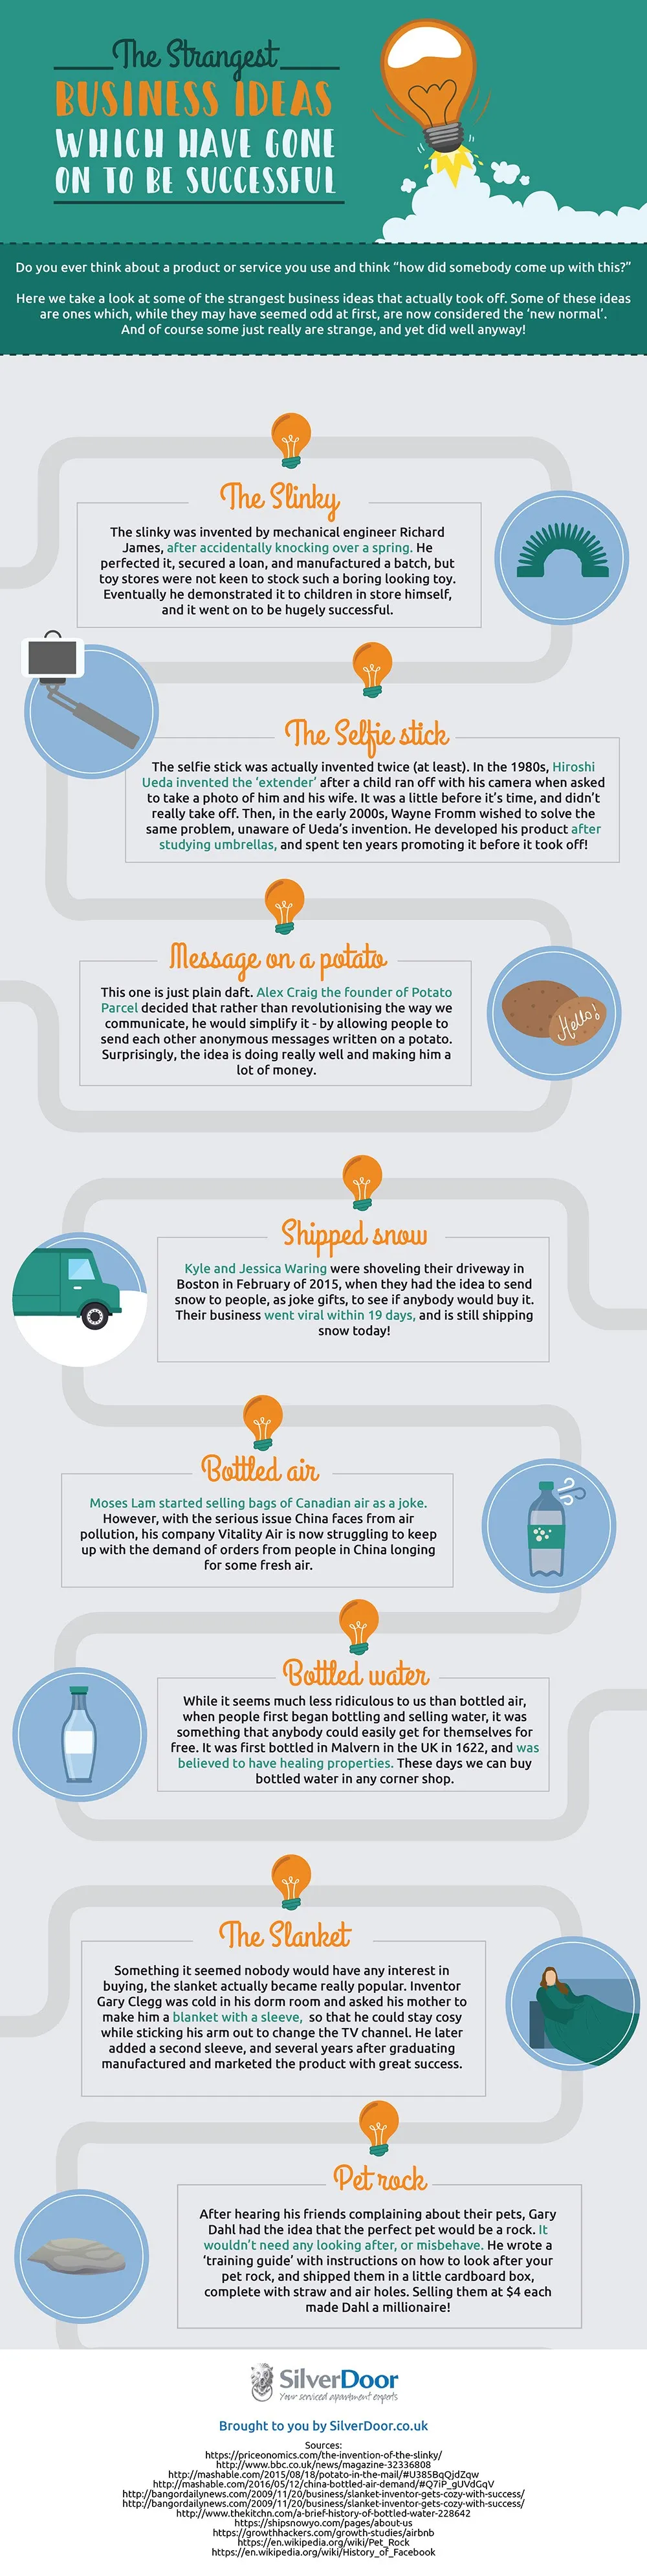 The Strangest Business Ideas Which Have Gone On To Be Successful - #Infographic